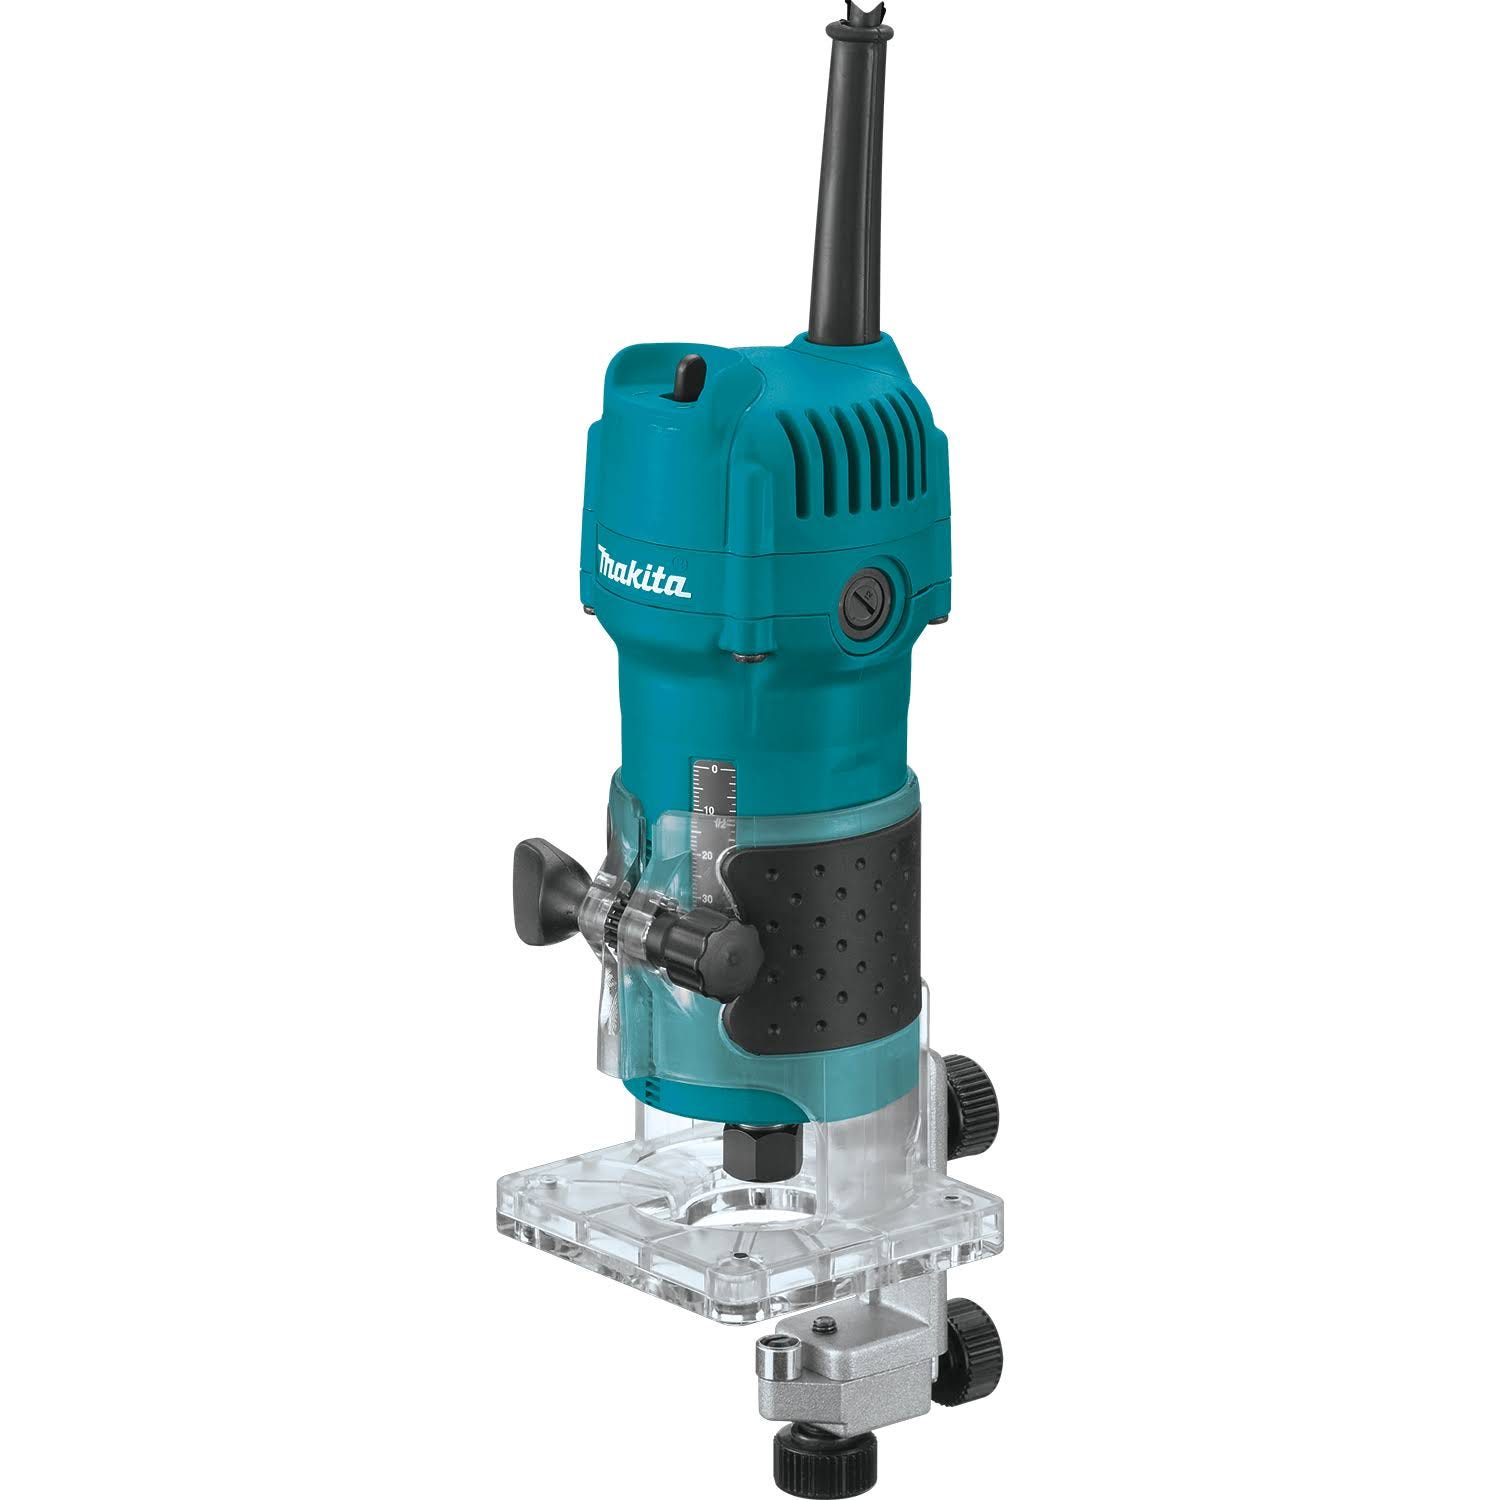 Makita 3709: High-Performance Laminate Trimmer with Adjustable Depth | Image